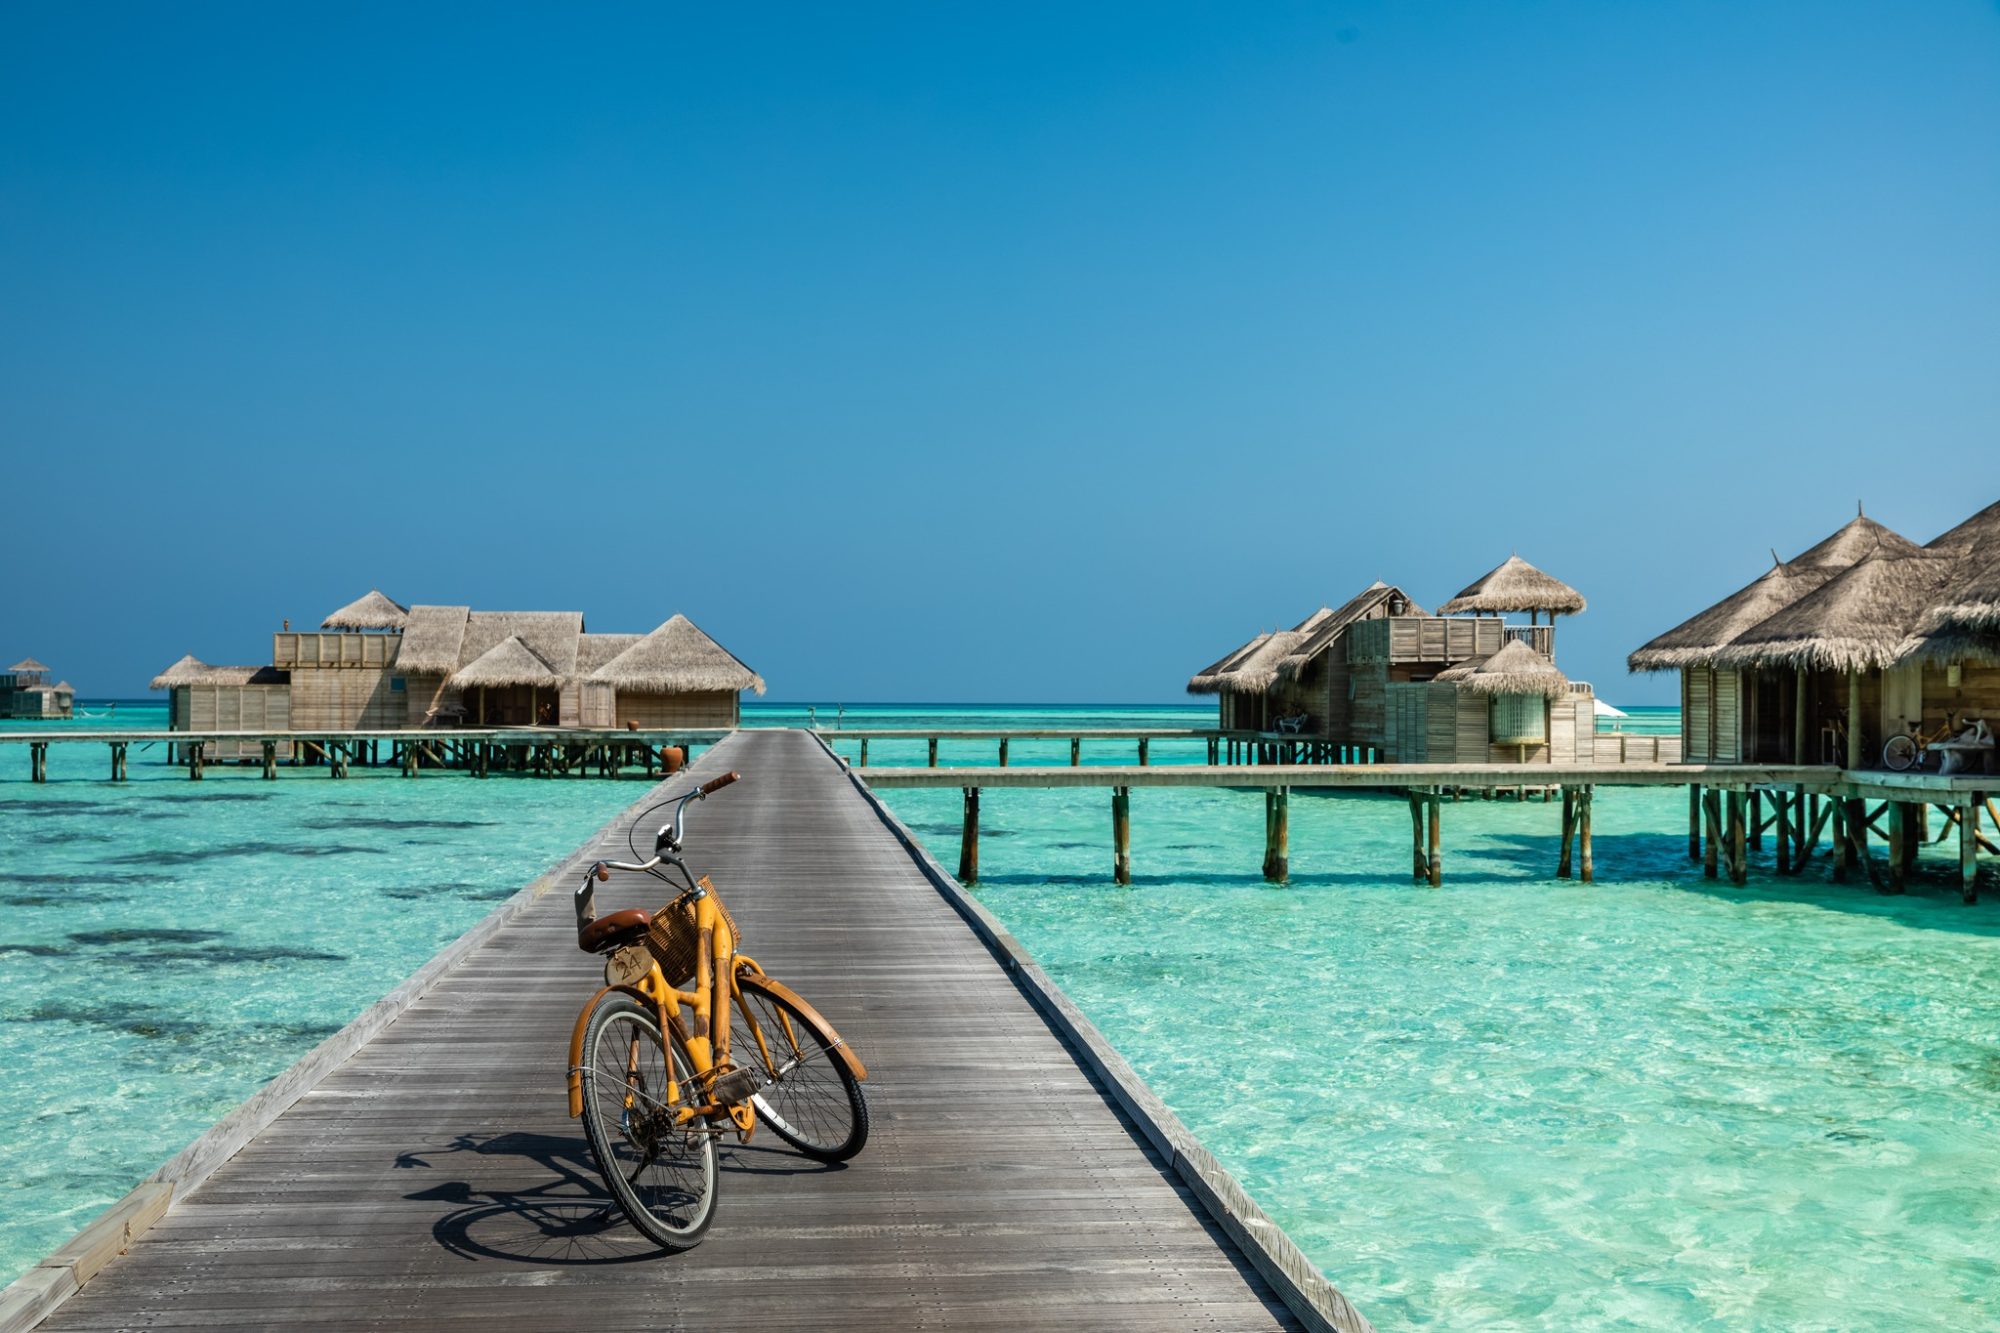 In the heart of the Maldives, Gili Lankanfushi carves out a niche in exclusivity